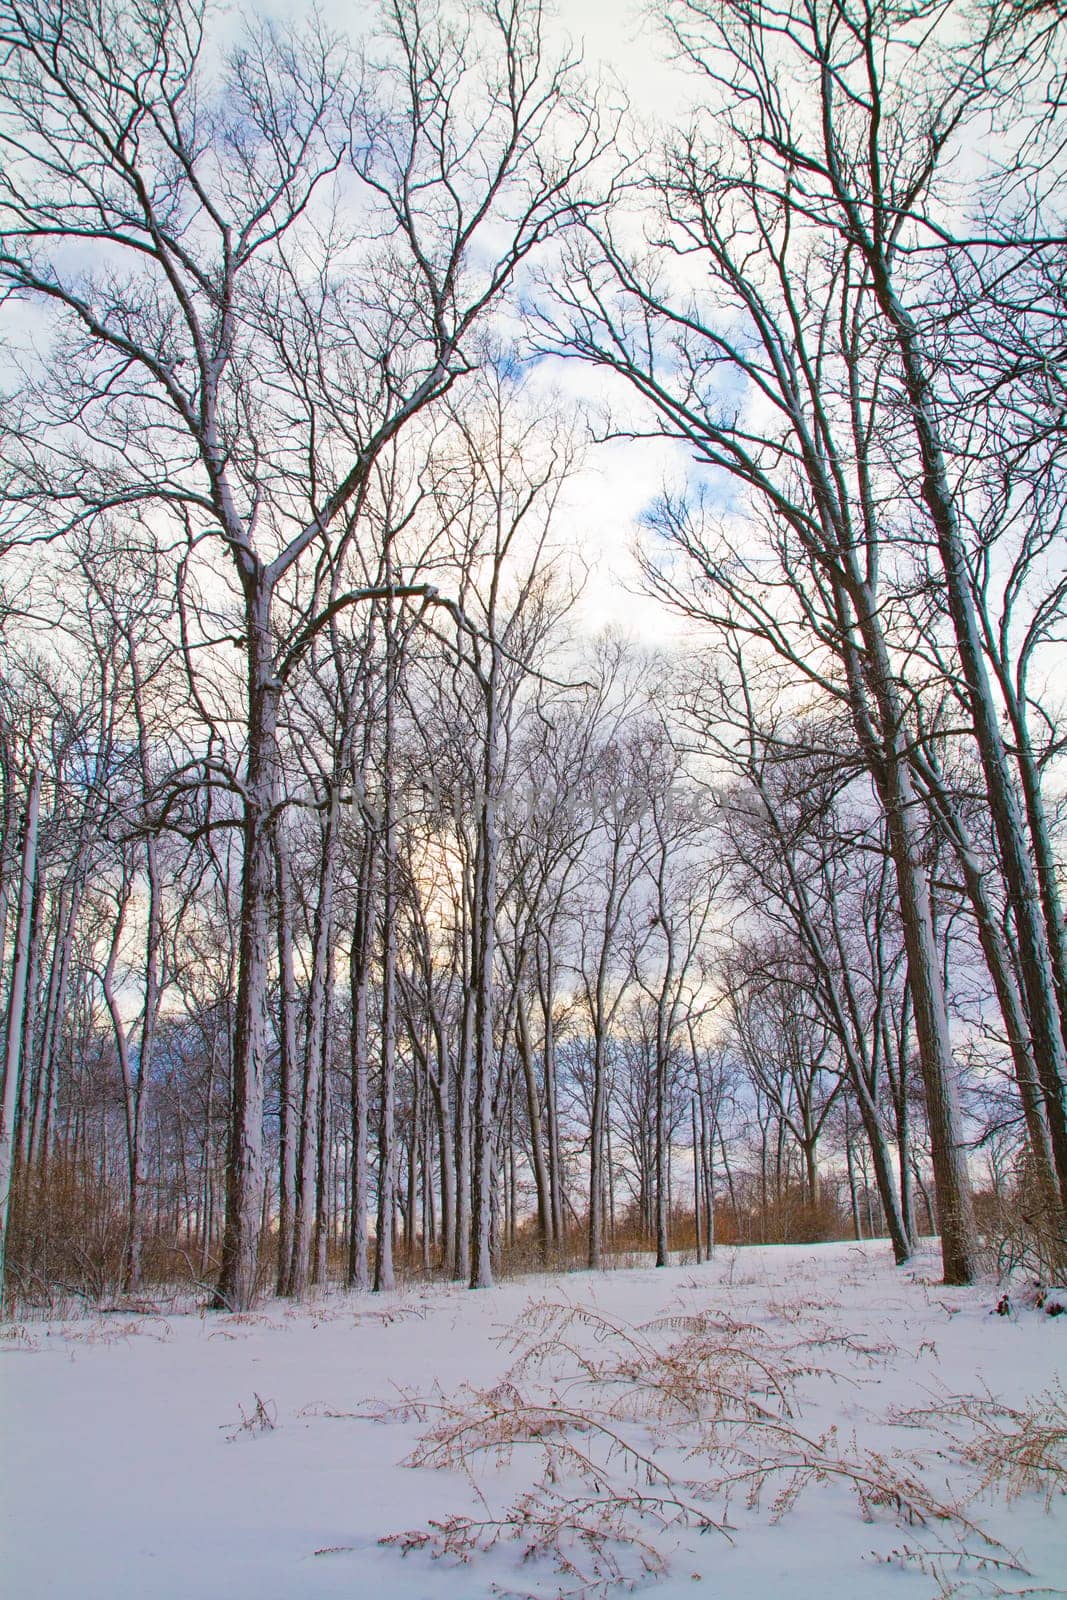 Winter Tranquility: Pristine Snow and Bare Trees in Fort Wayne, Indiana by njproductions